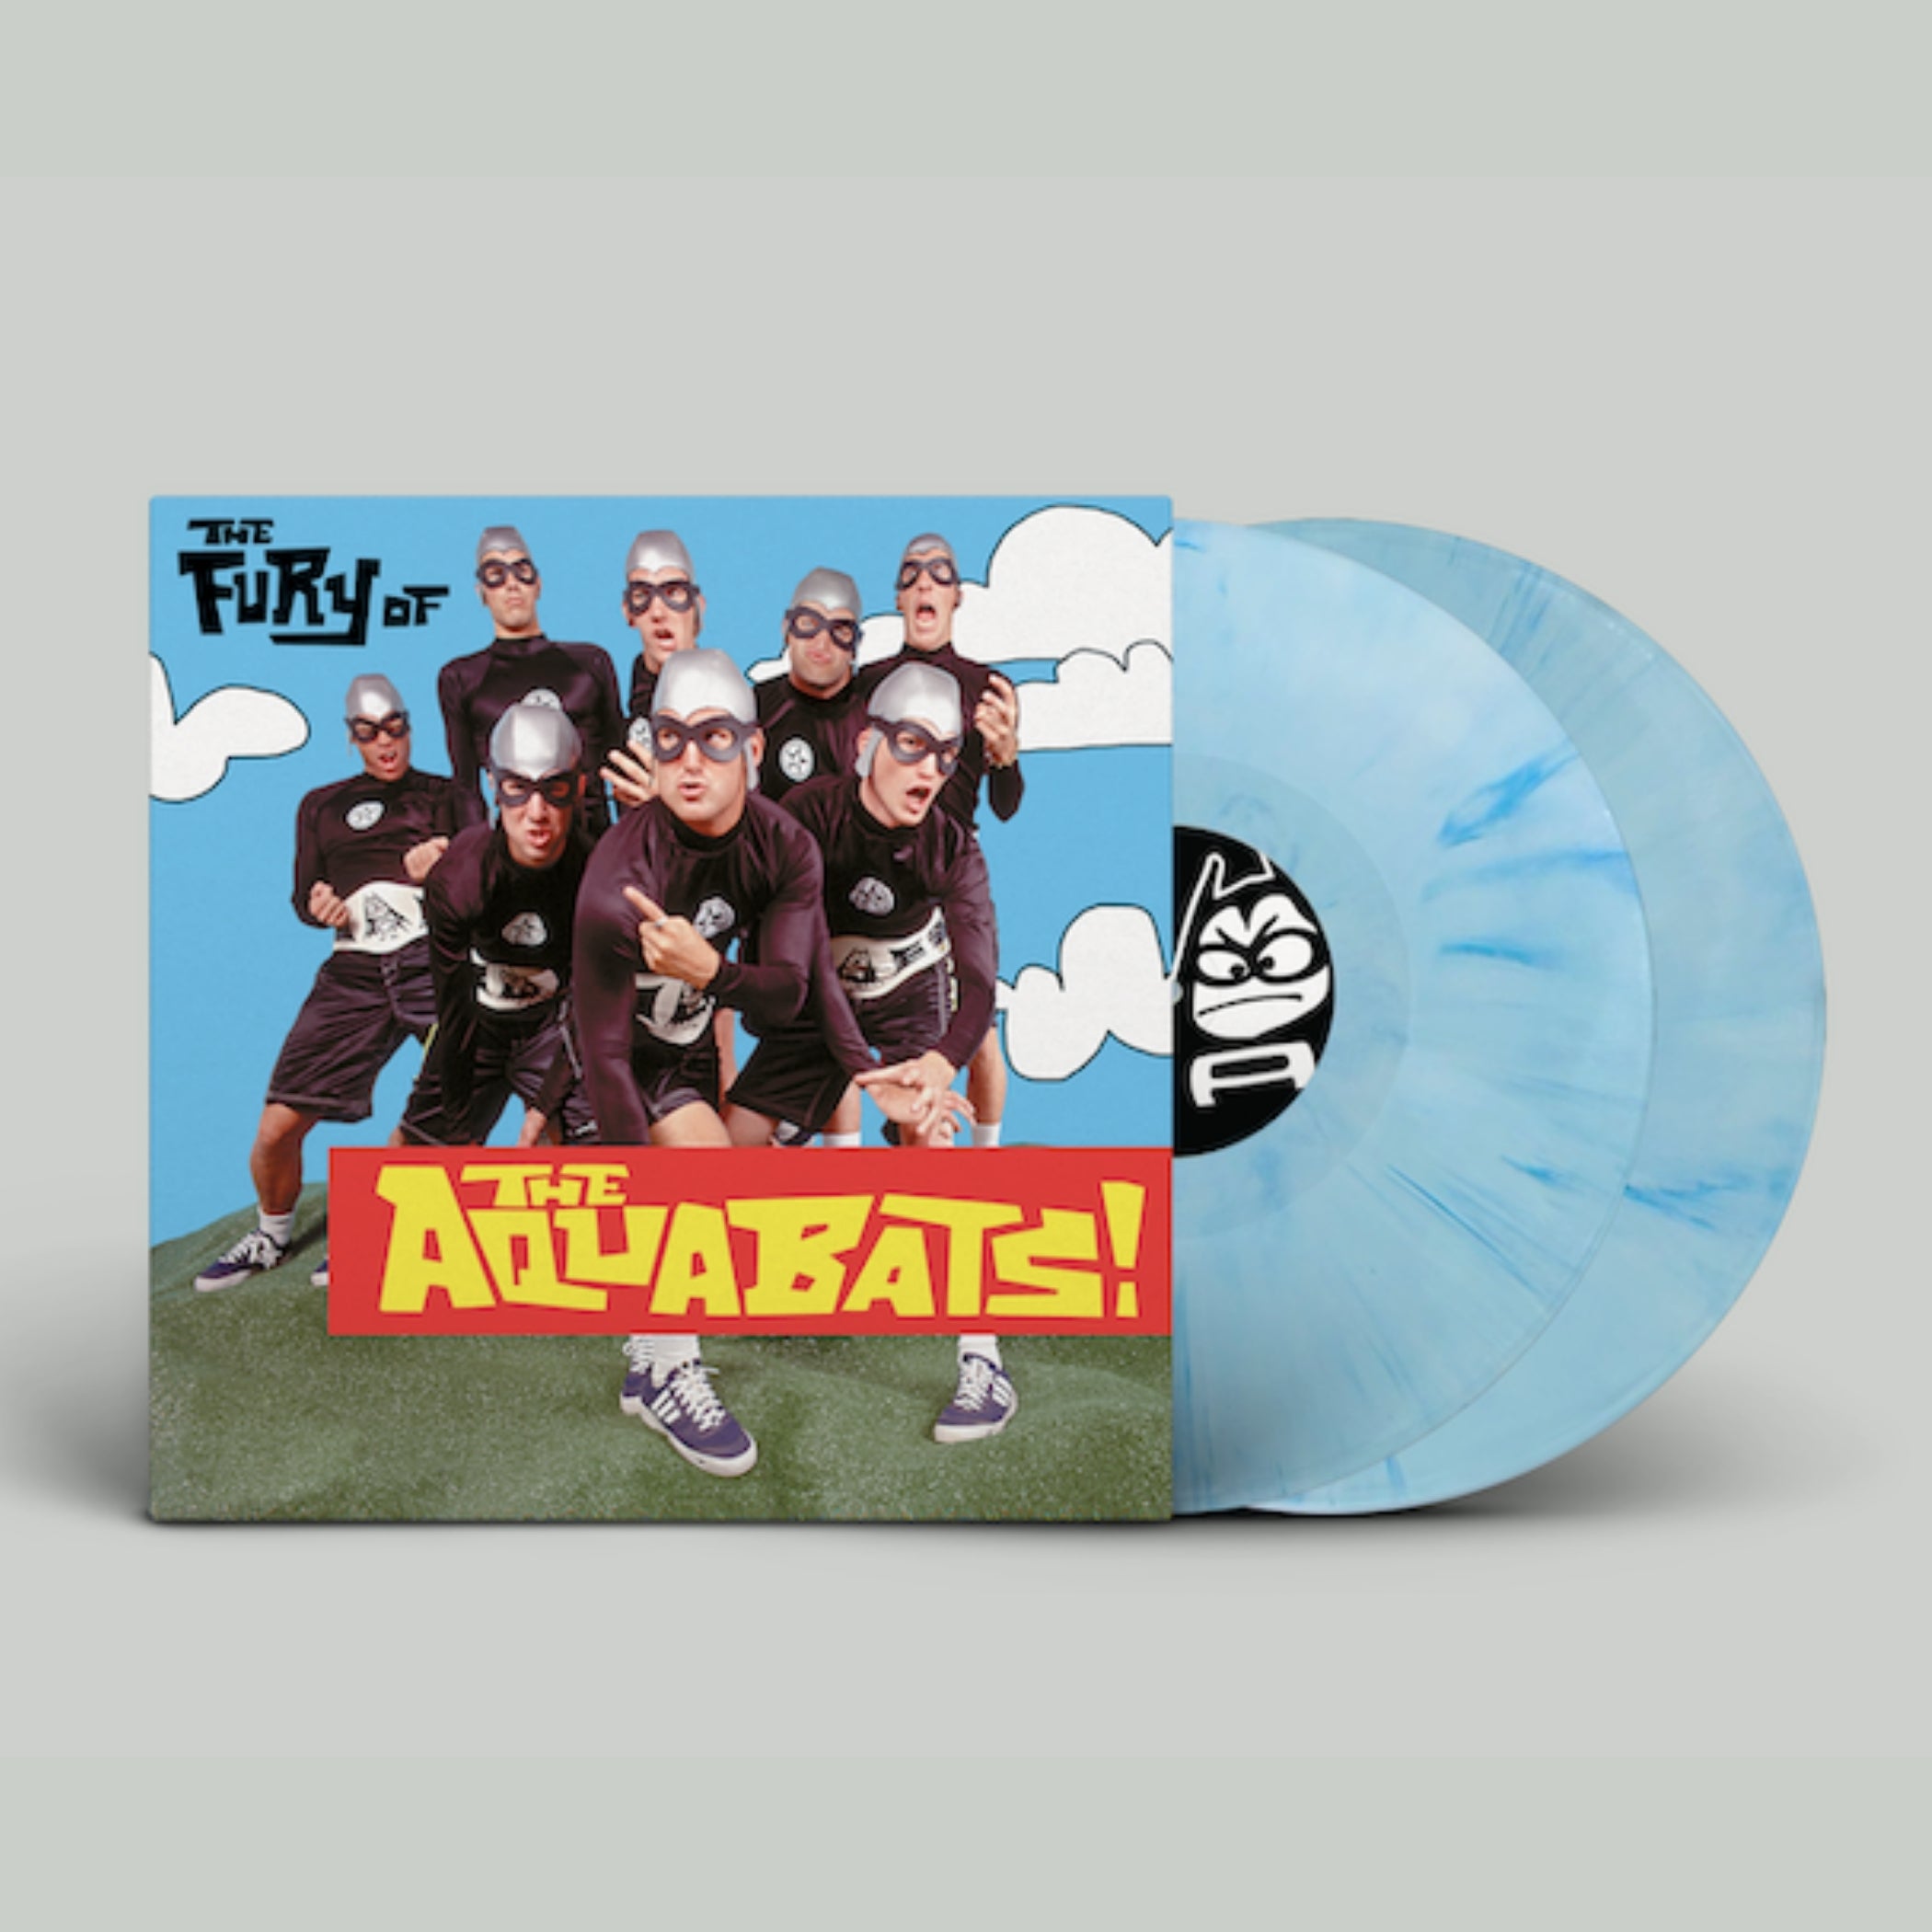 PRE-ORDER The Fury of The Aquabats! gloopy-Exclusive "Partly Cloudy" Blue Double LP